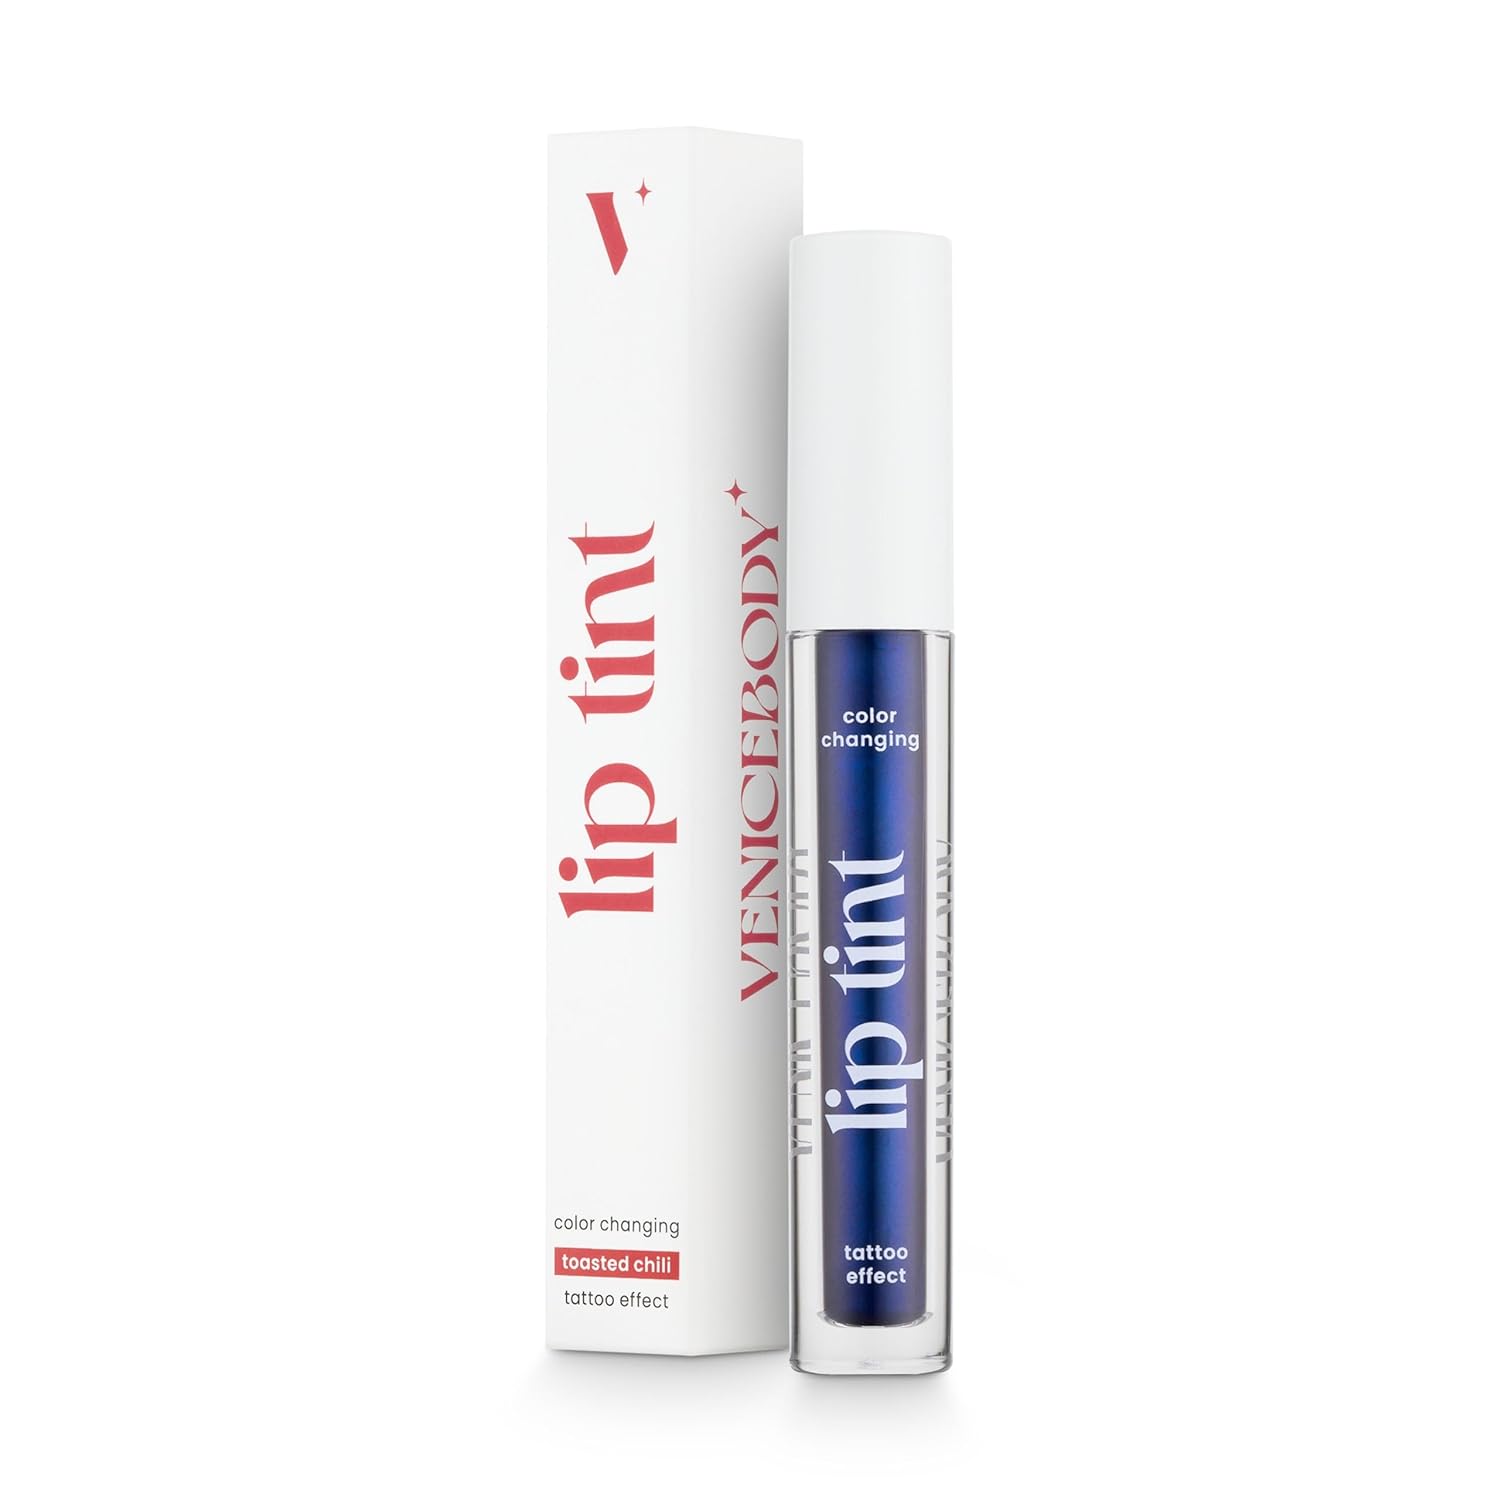 Venicebody Color -Changing Lip Tint Tattoo Effect - Replaces Lipstick, Lasts All Day Without Smudging (Toasted Chilli)